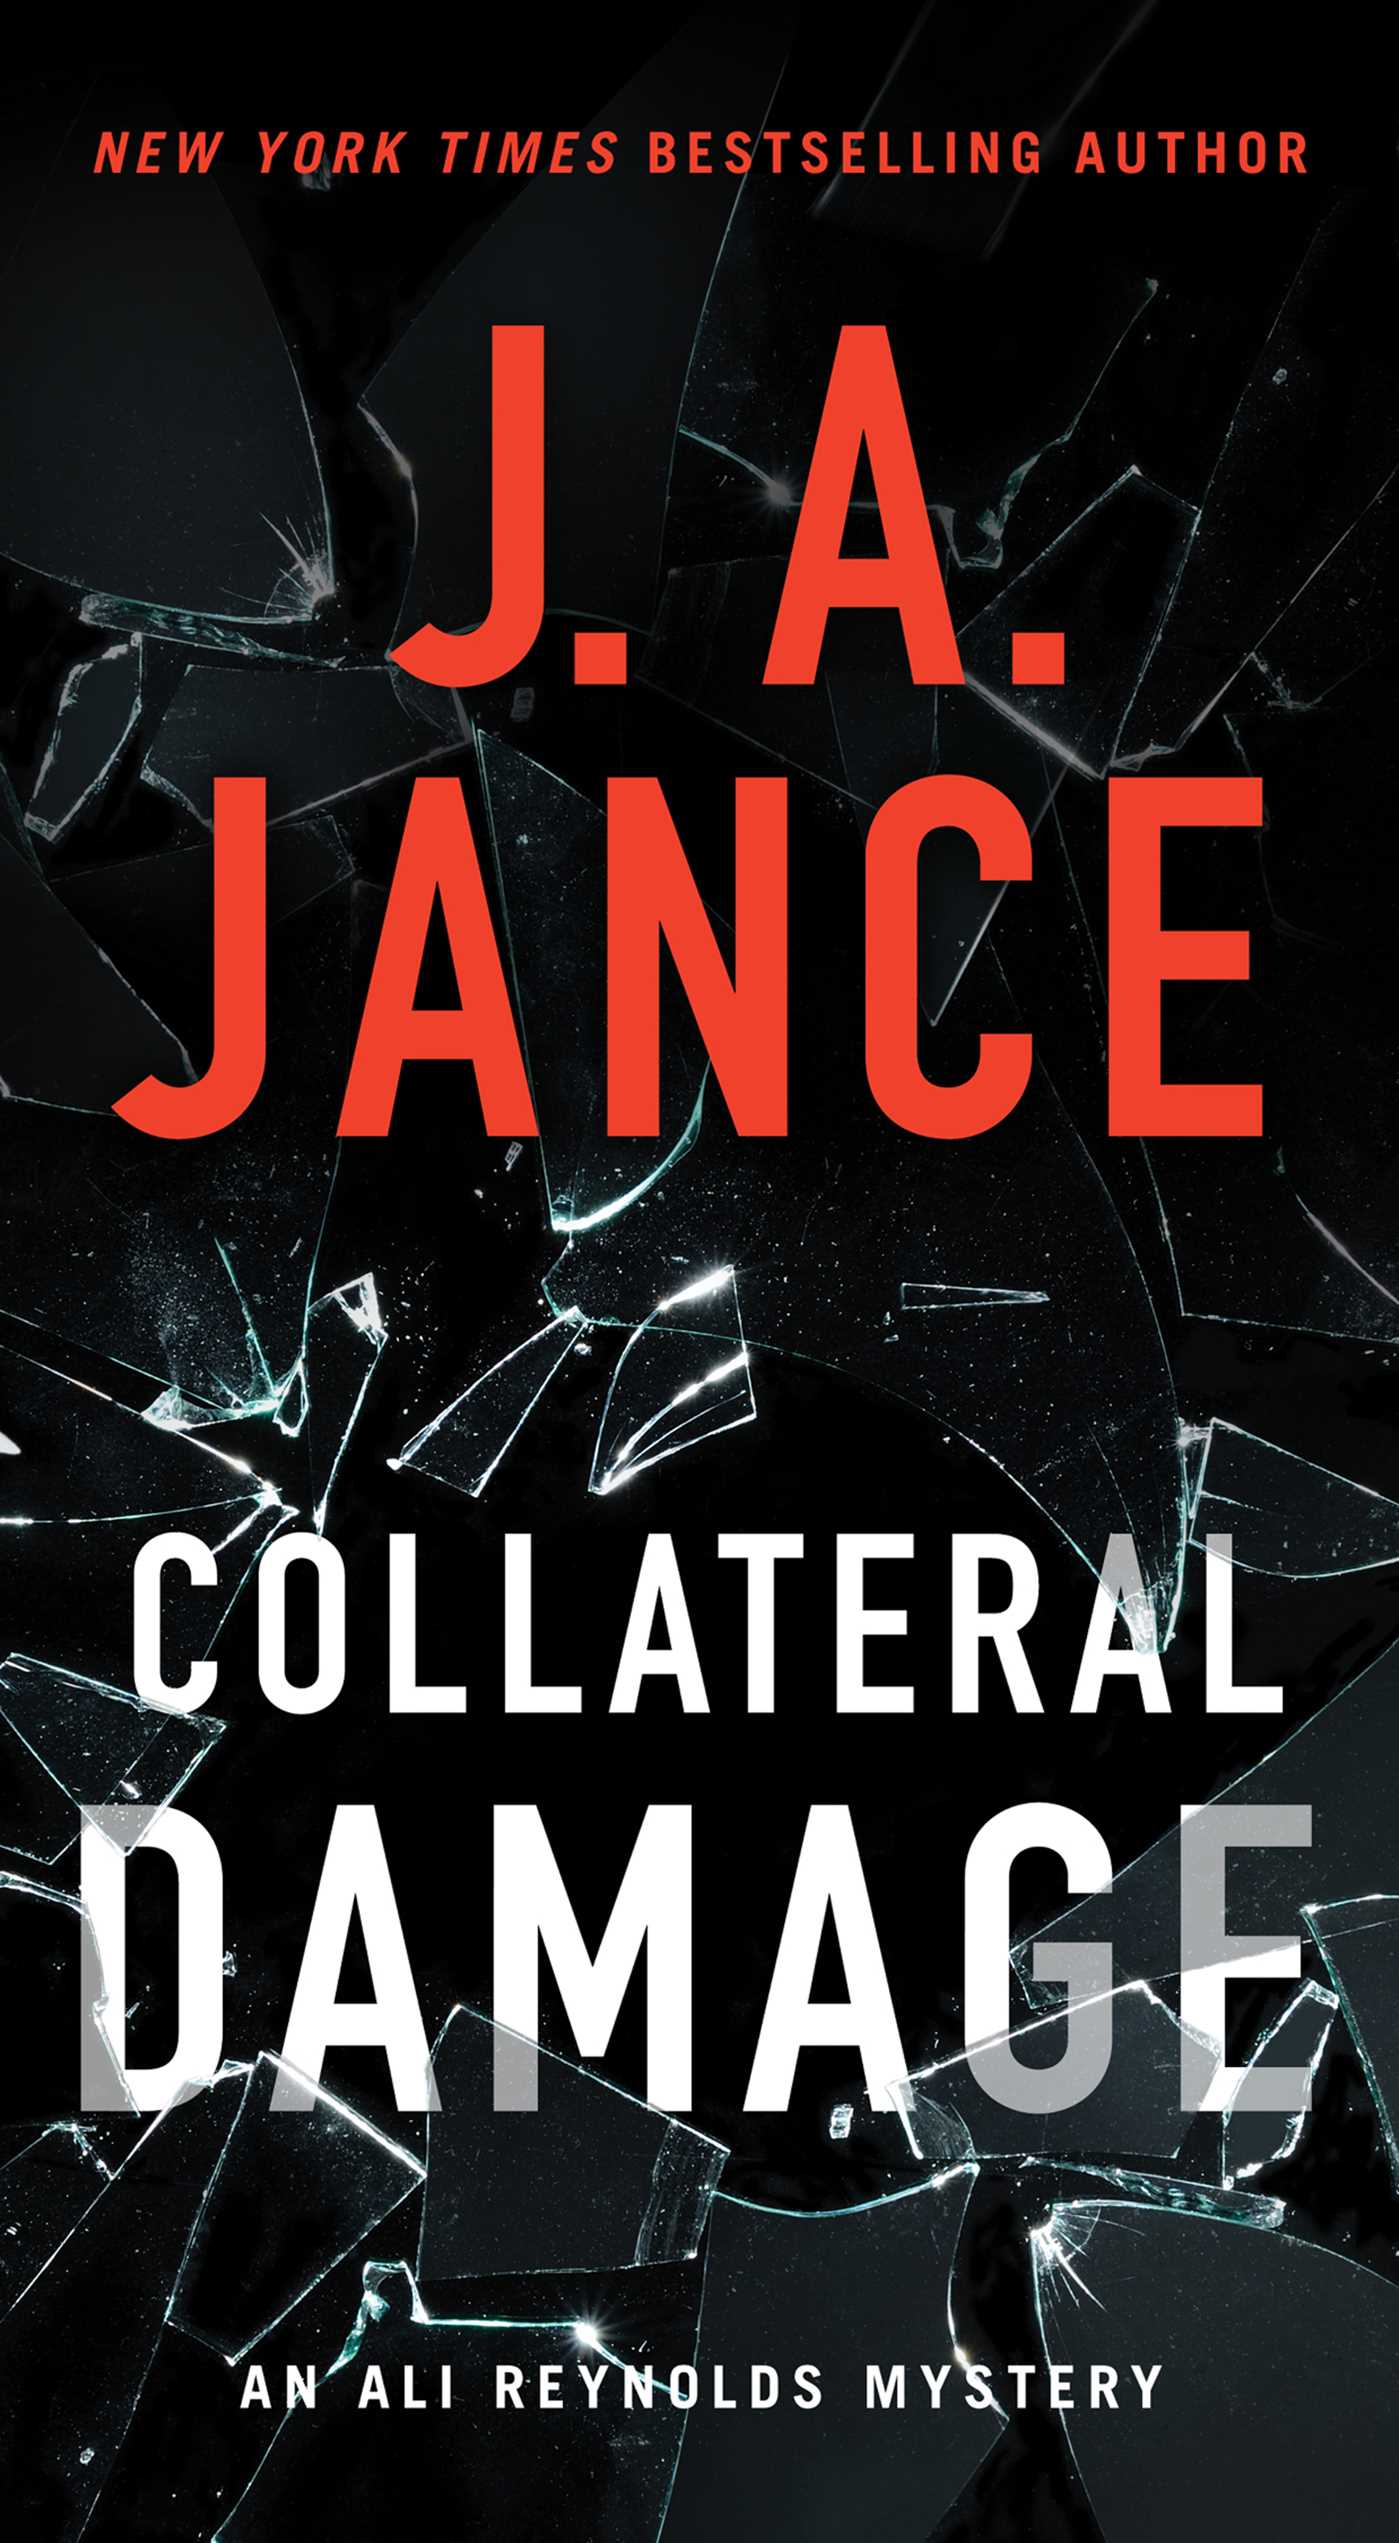 Collateral Damage cover image